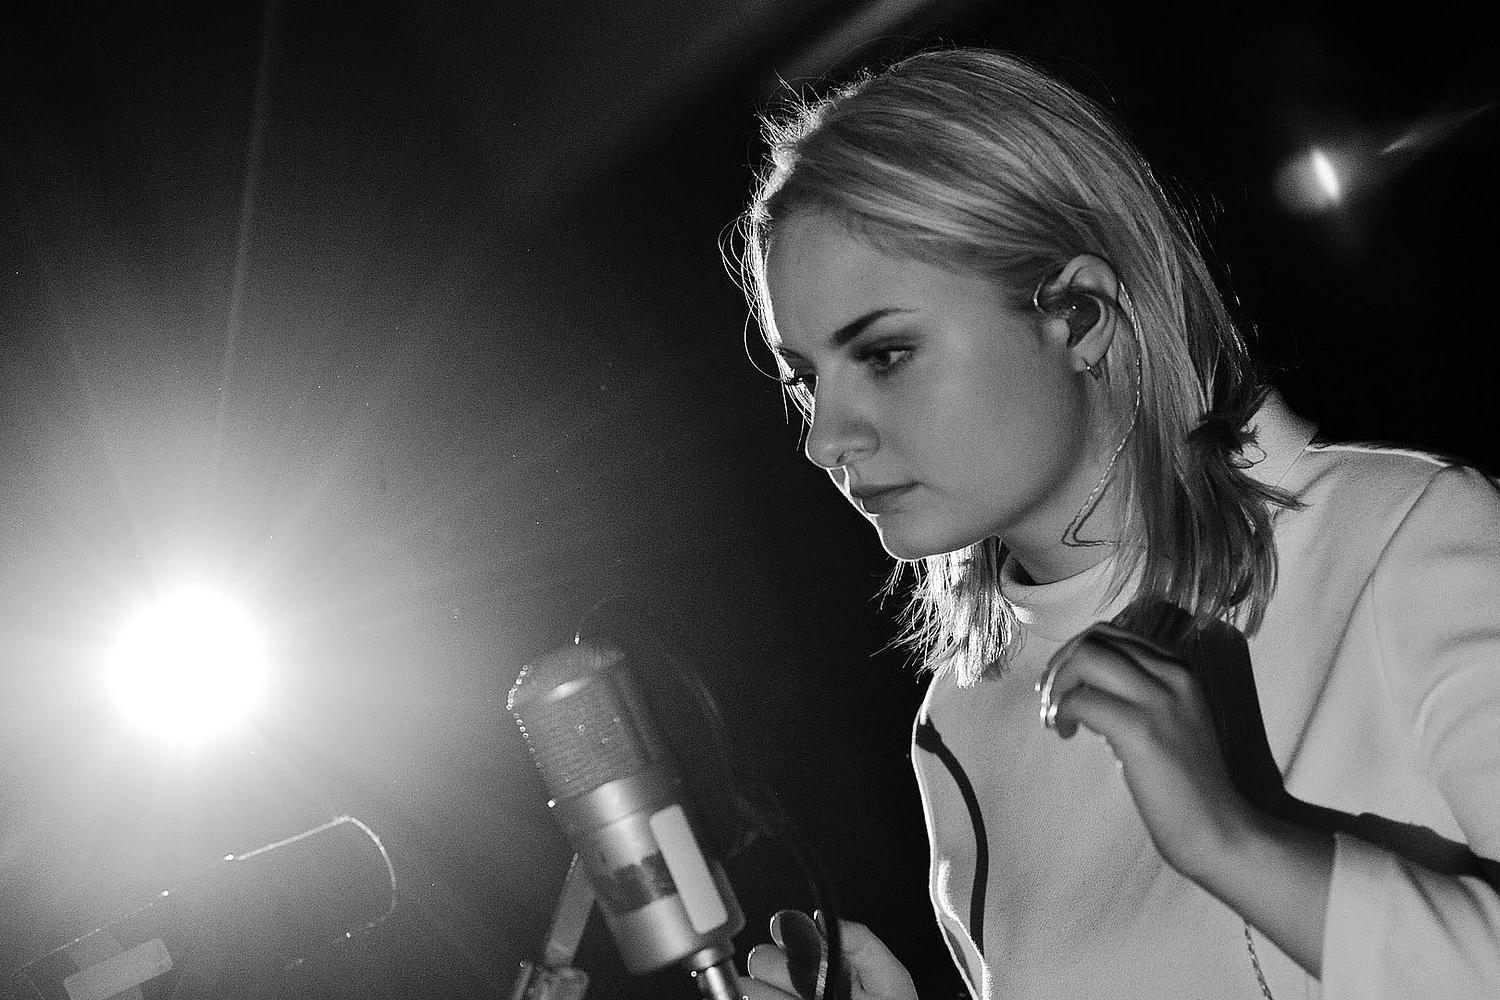 Watch Låpsley debut new ‘8896’ track in Maida Vale session